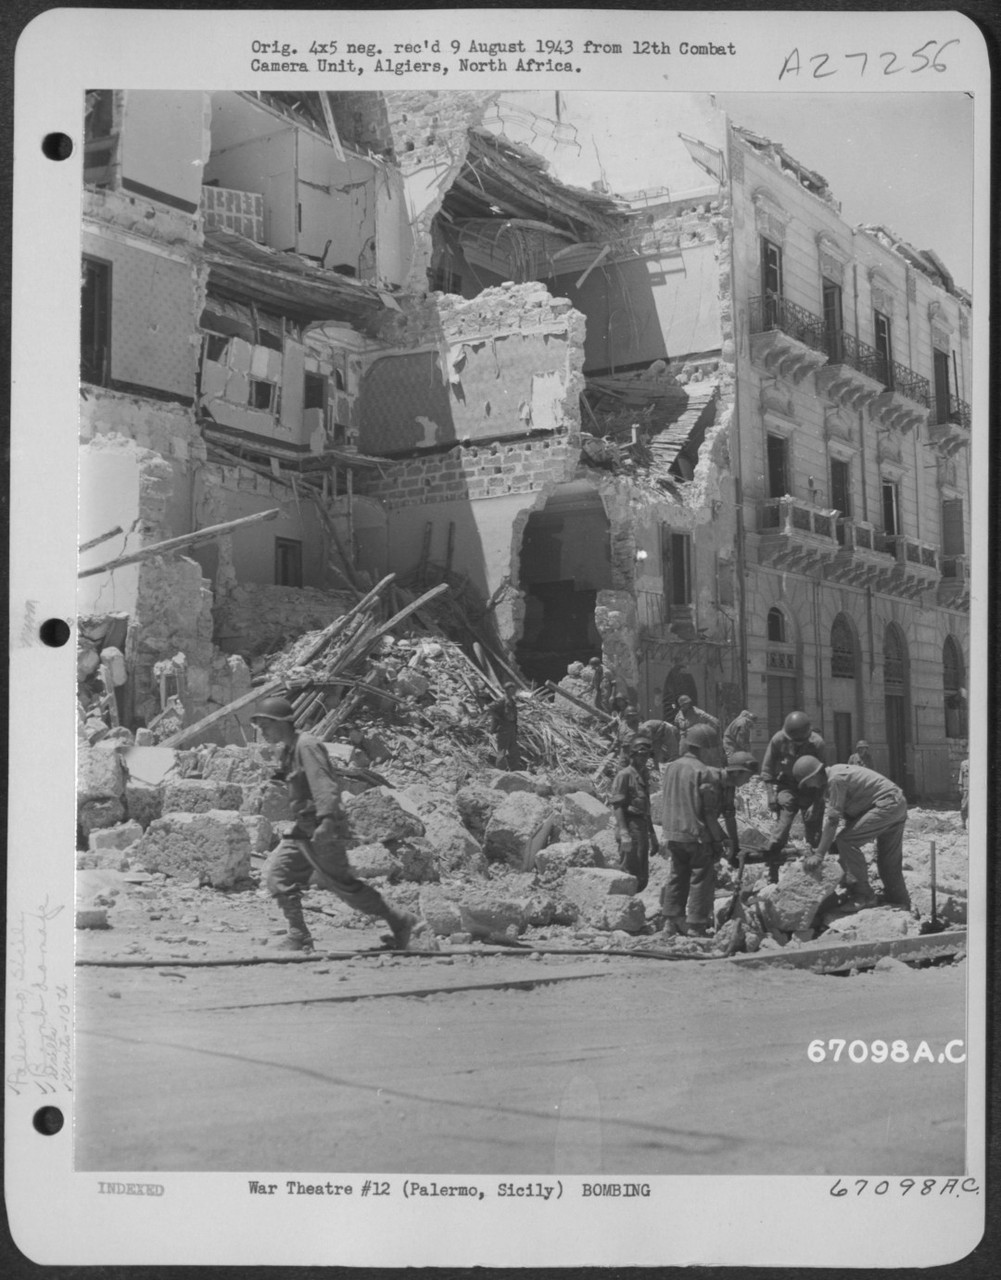 The bombings of Messina and Palermo